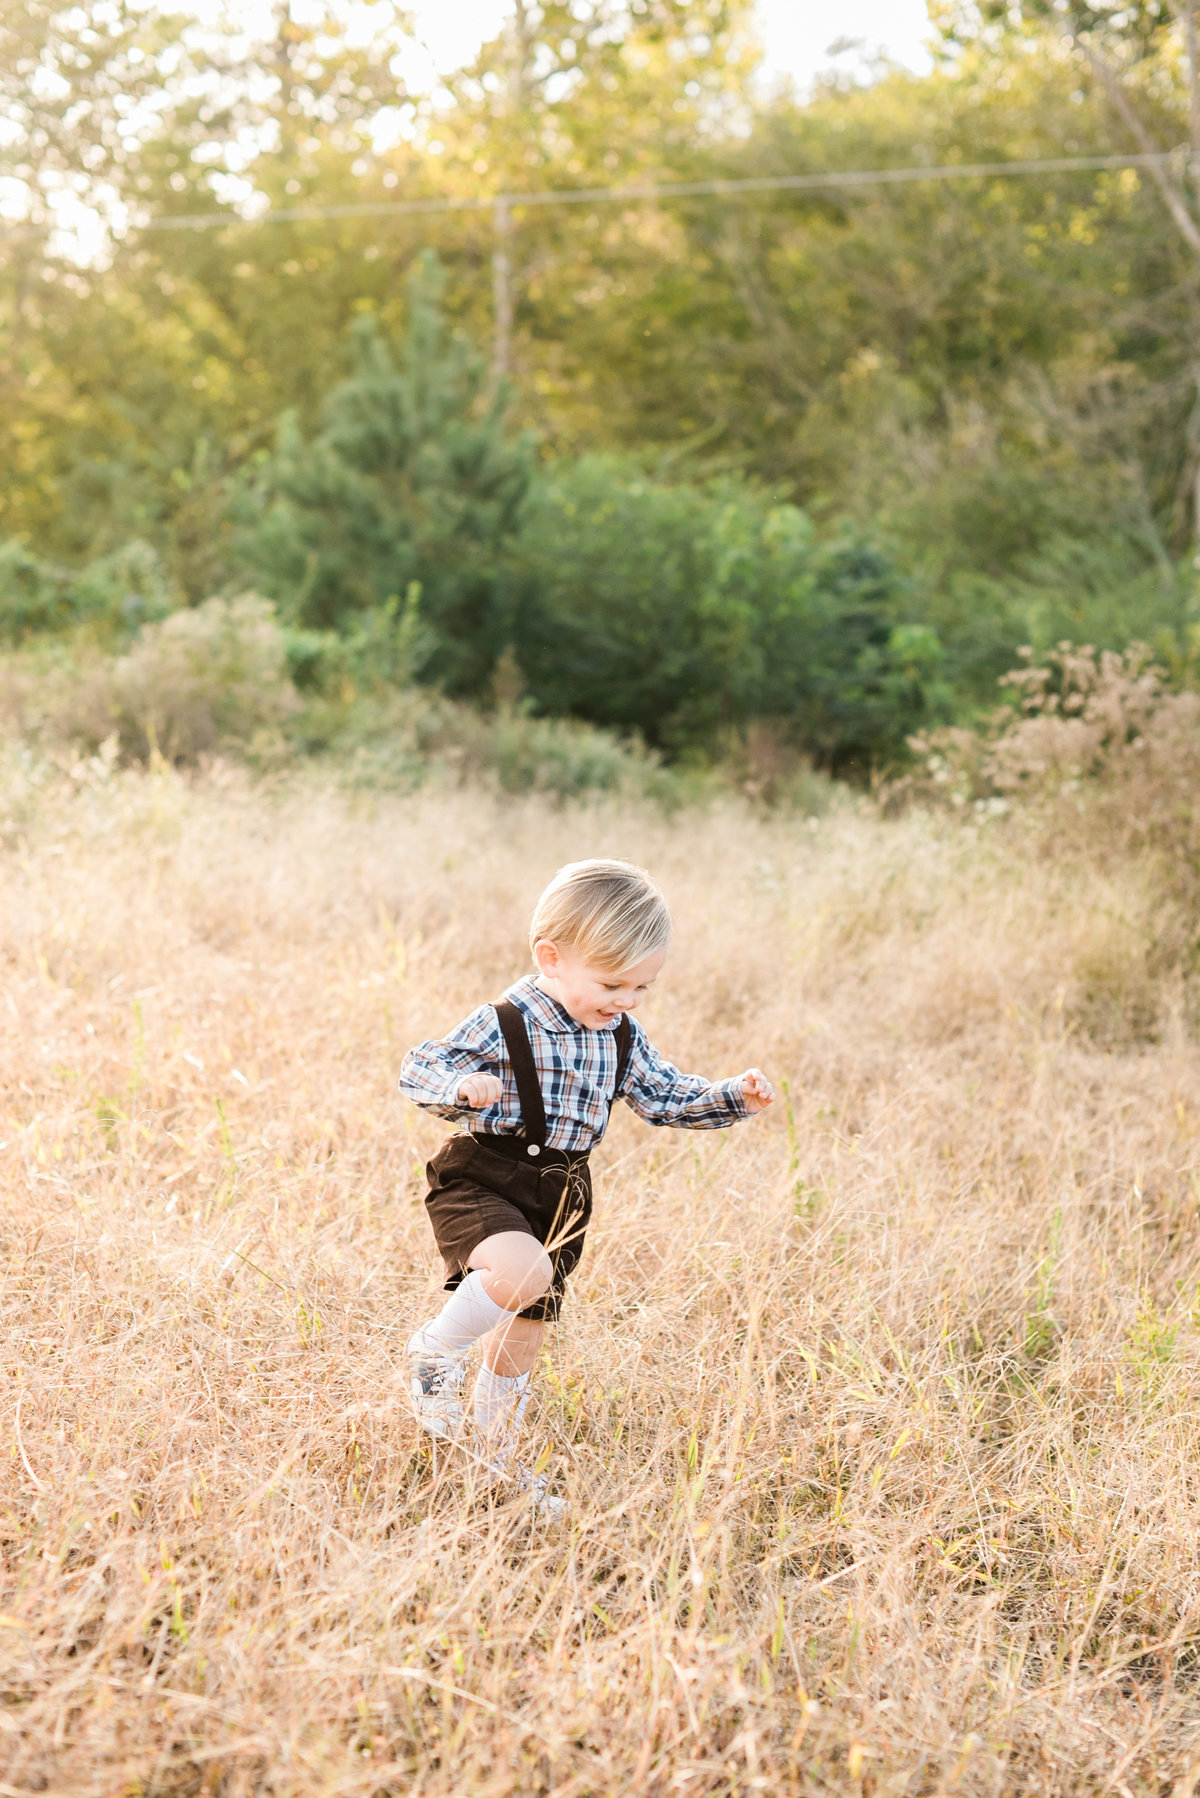 Toddler runs through a field playing during a Raleigh family photo session at Horseshoe Nature Preserve. Photographed by Raleigh NC Family Photographer A.J. Dunlap Photography.